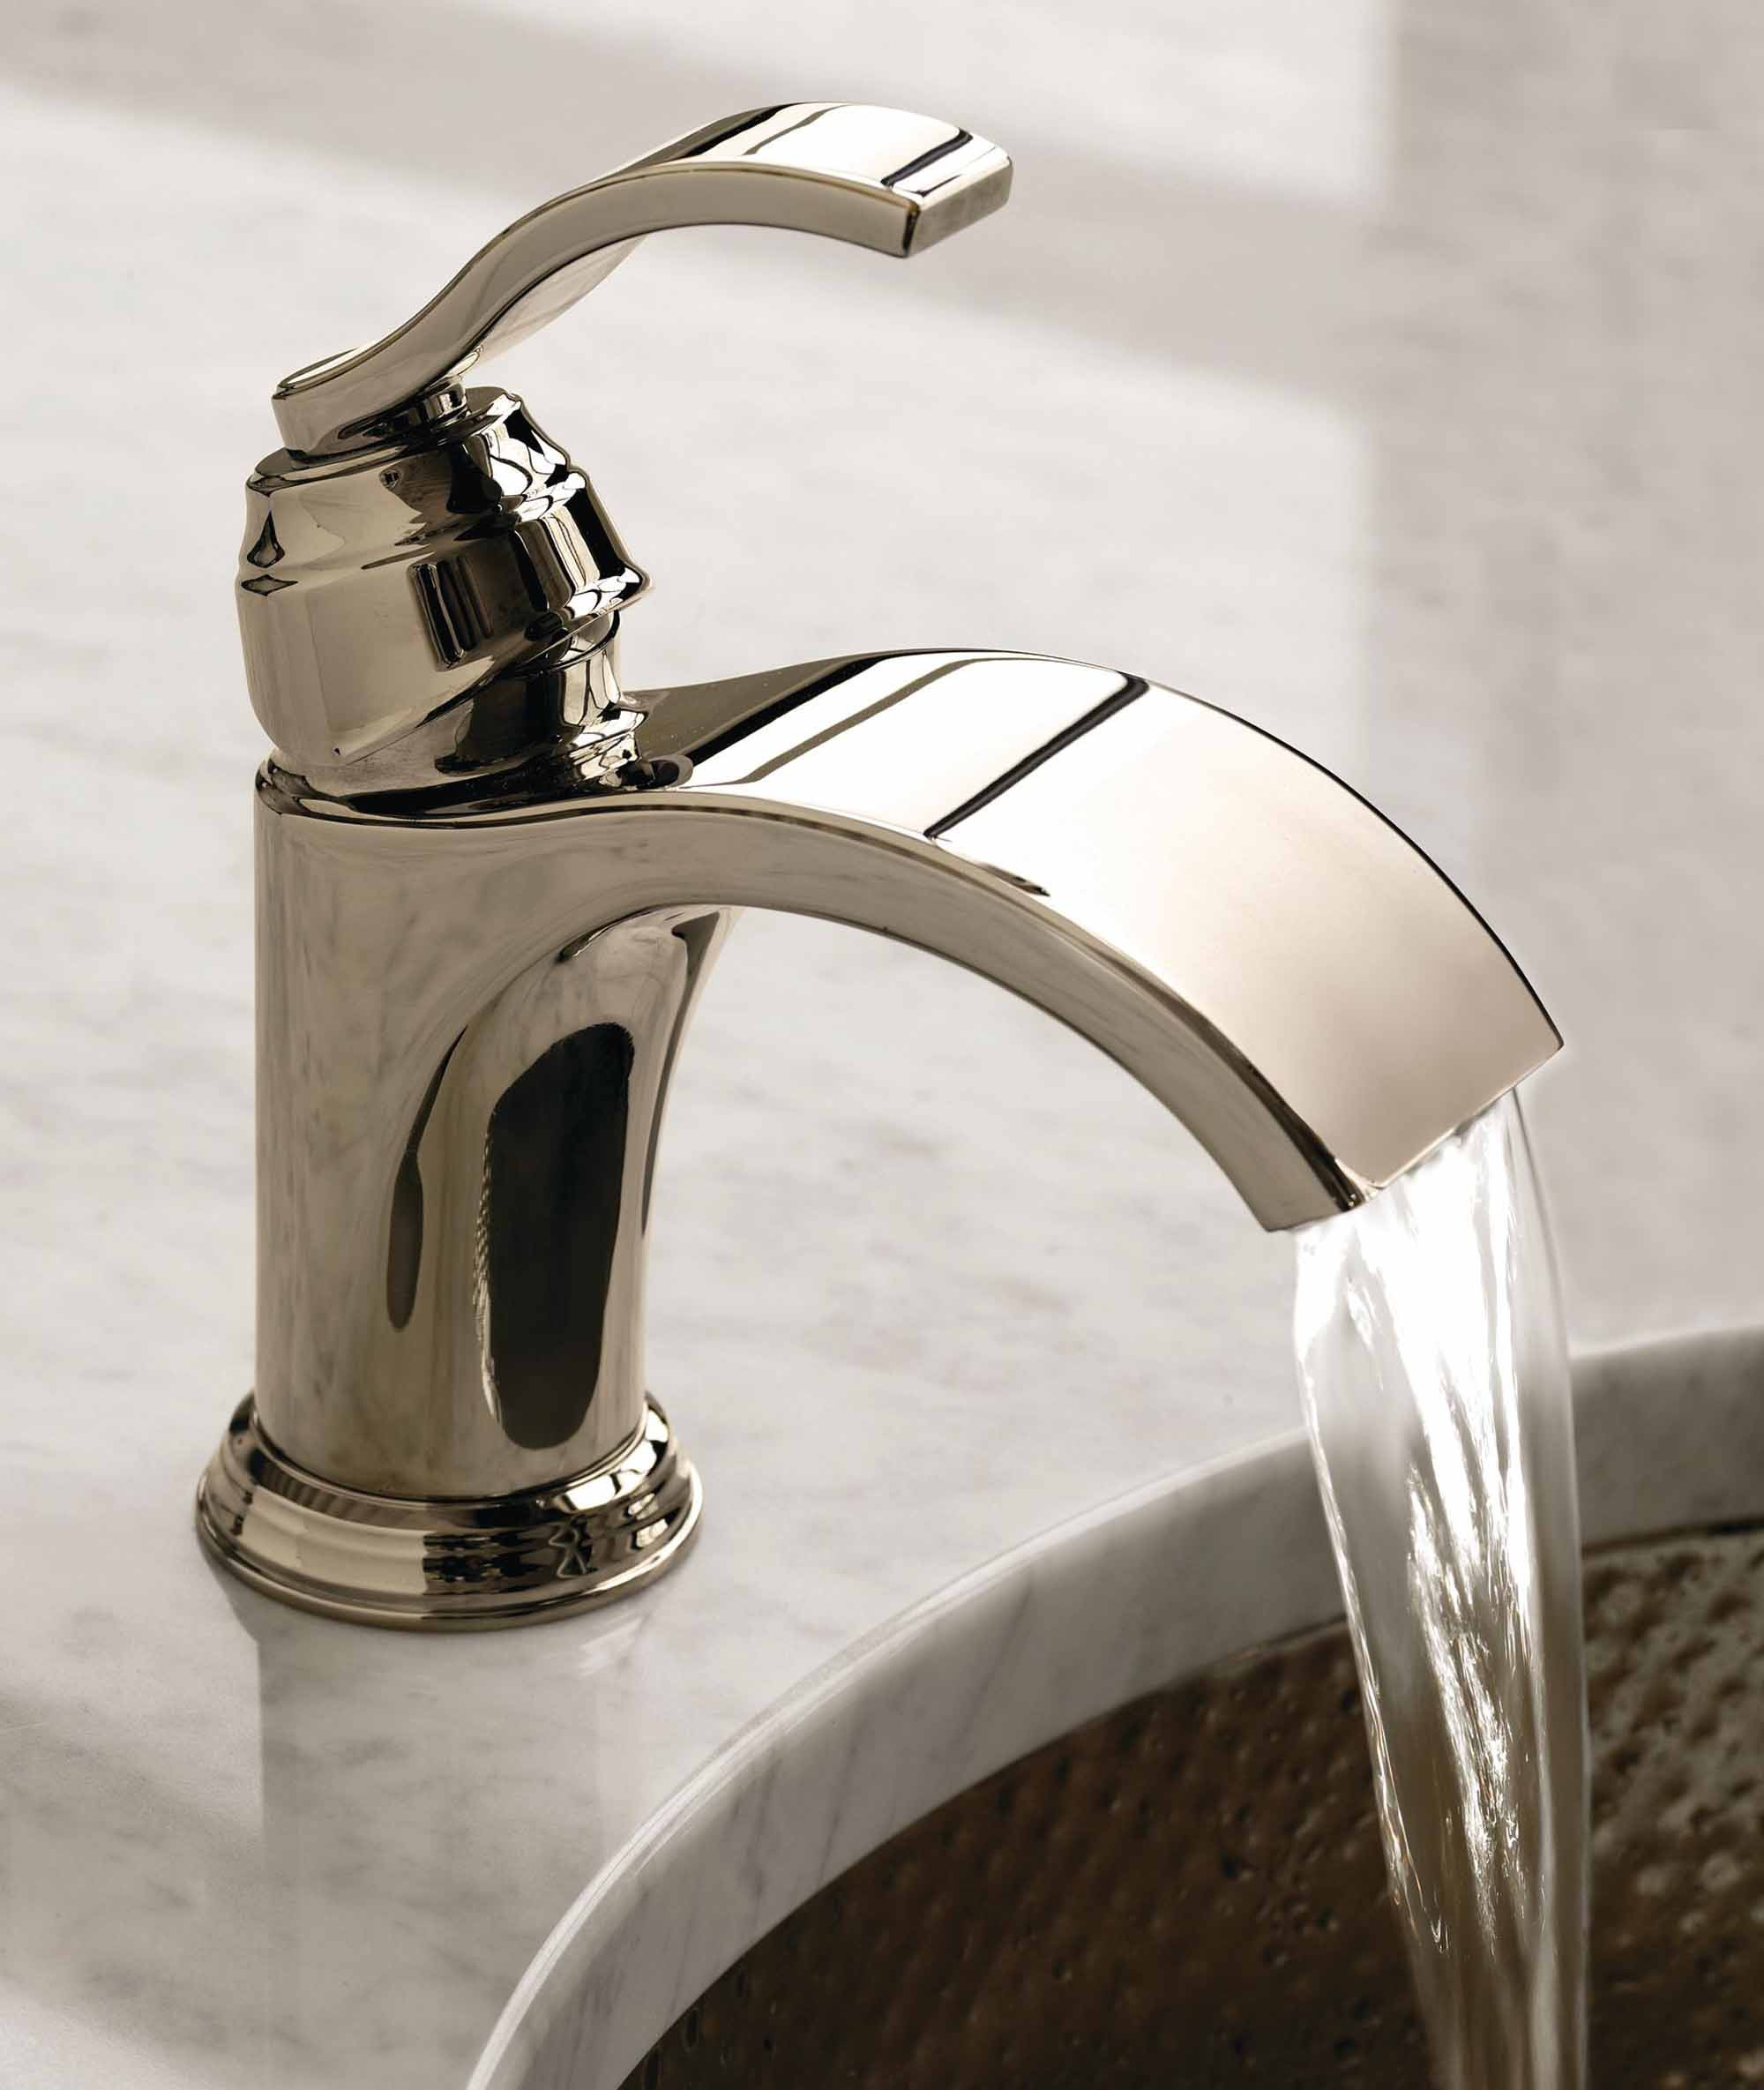 Lowes Bathroom Sinks And Faucets
 Bathroom Gorgeous Design Bathroom Sink Faucets For